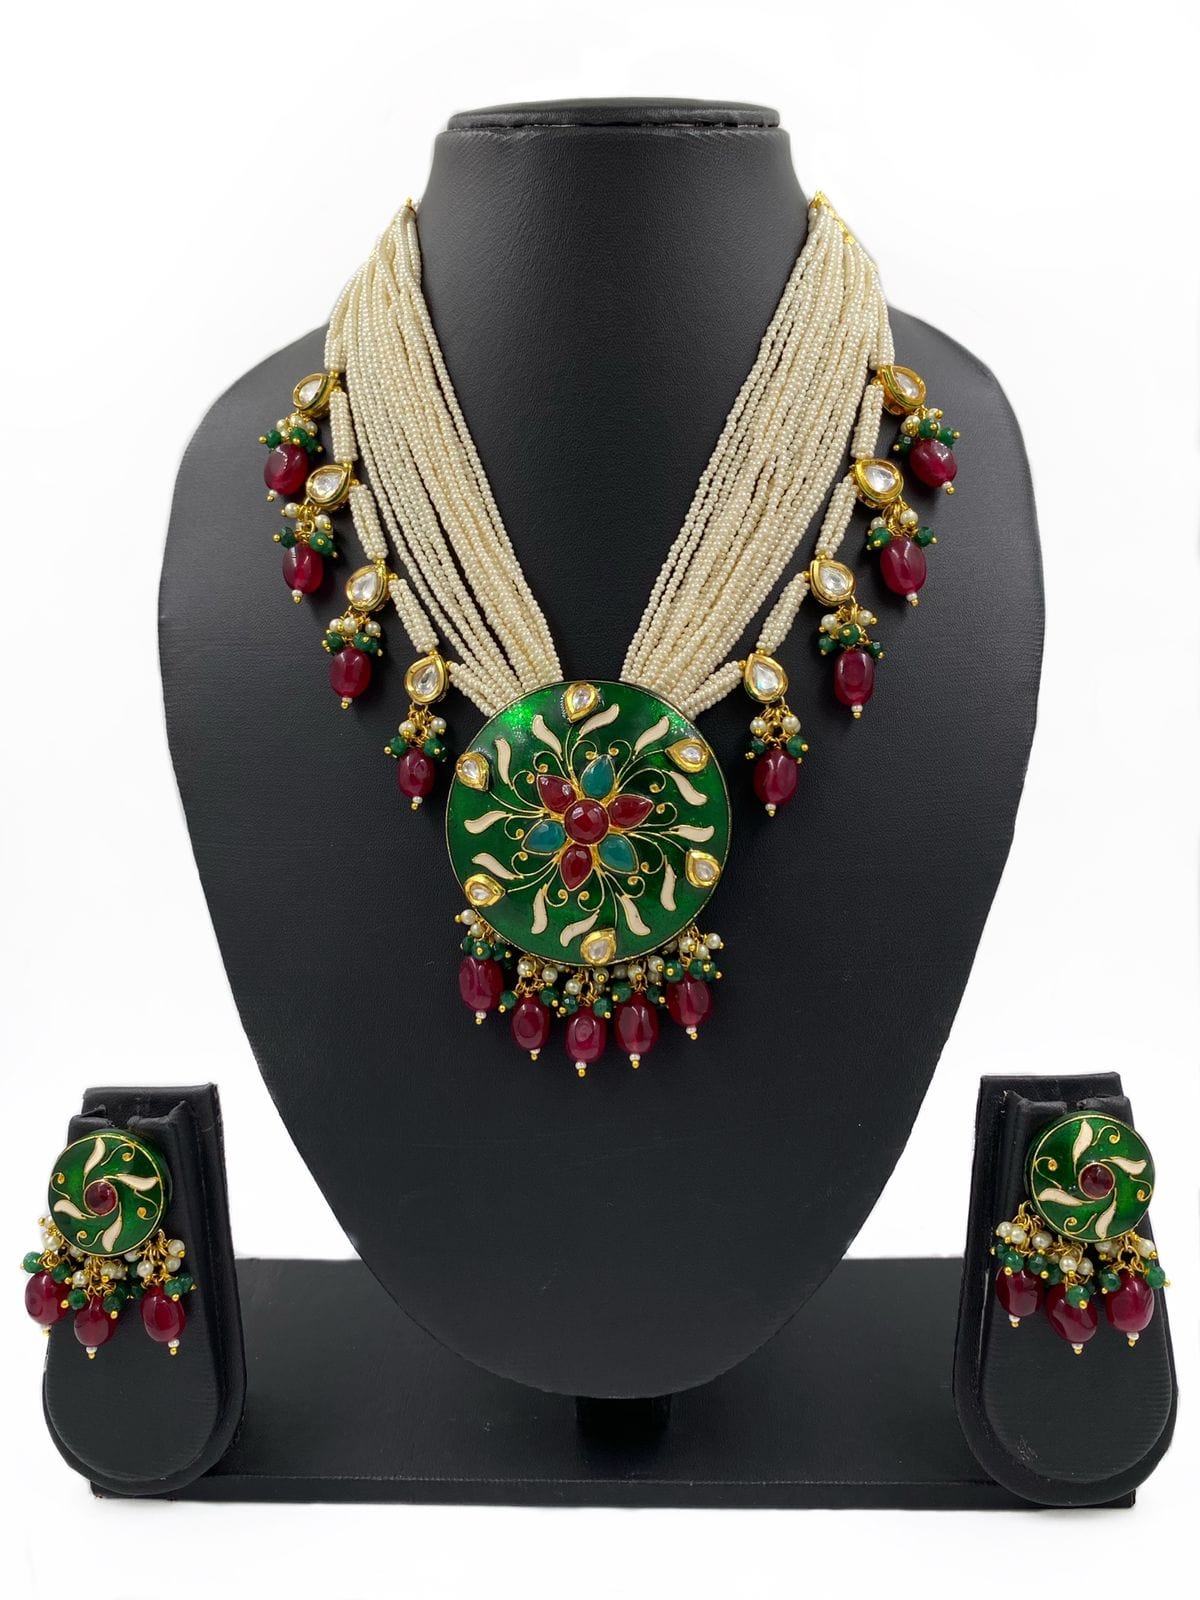 Traditional Green Meenakari Pendant Necklace Set With Pearls By Gehna Shop Meenakari Necklace Sets